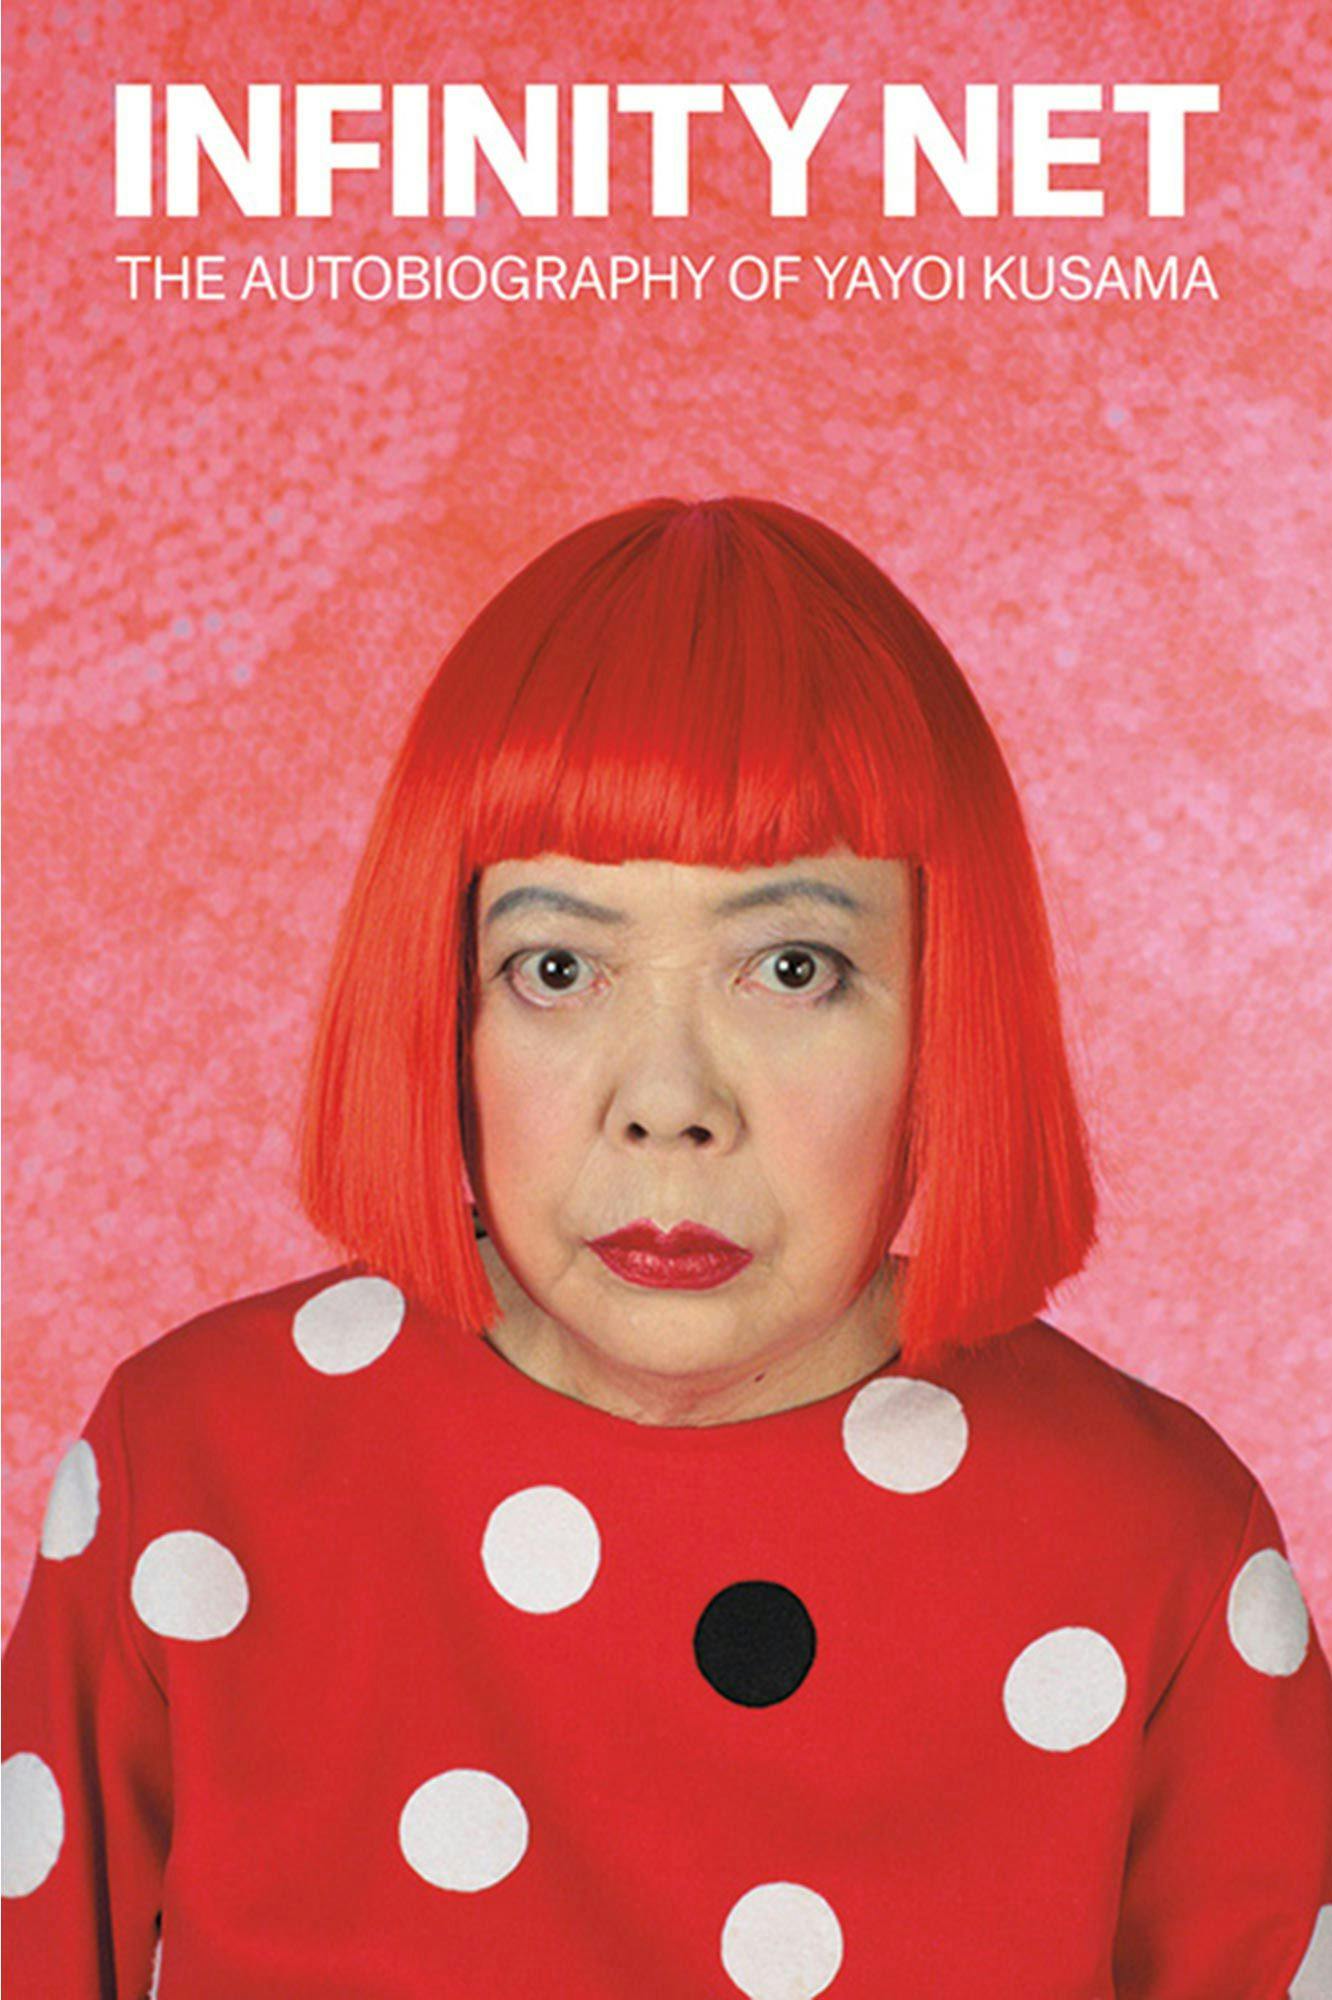 The cover of a book, titled Infinity Net: The Autobiography of Yayoi Kusama.